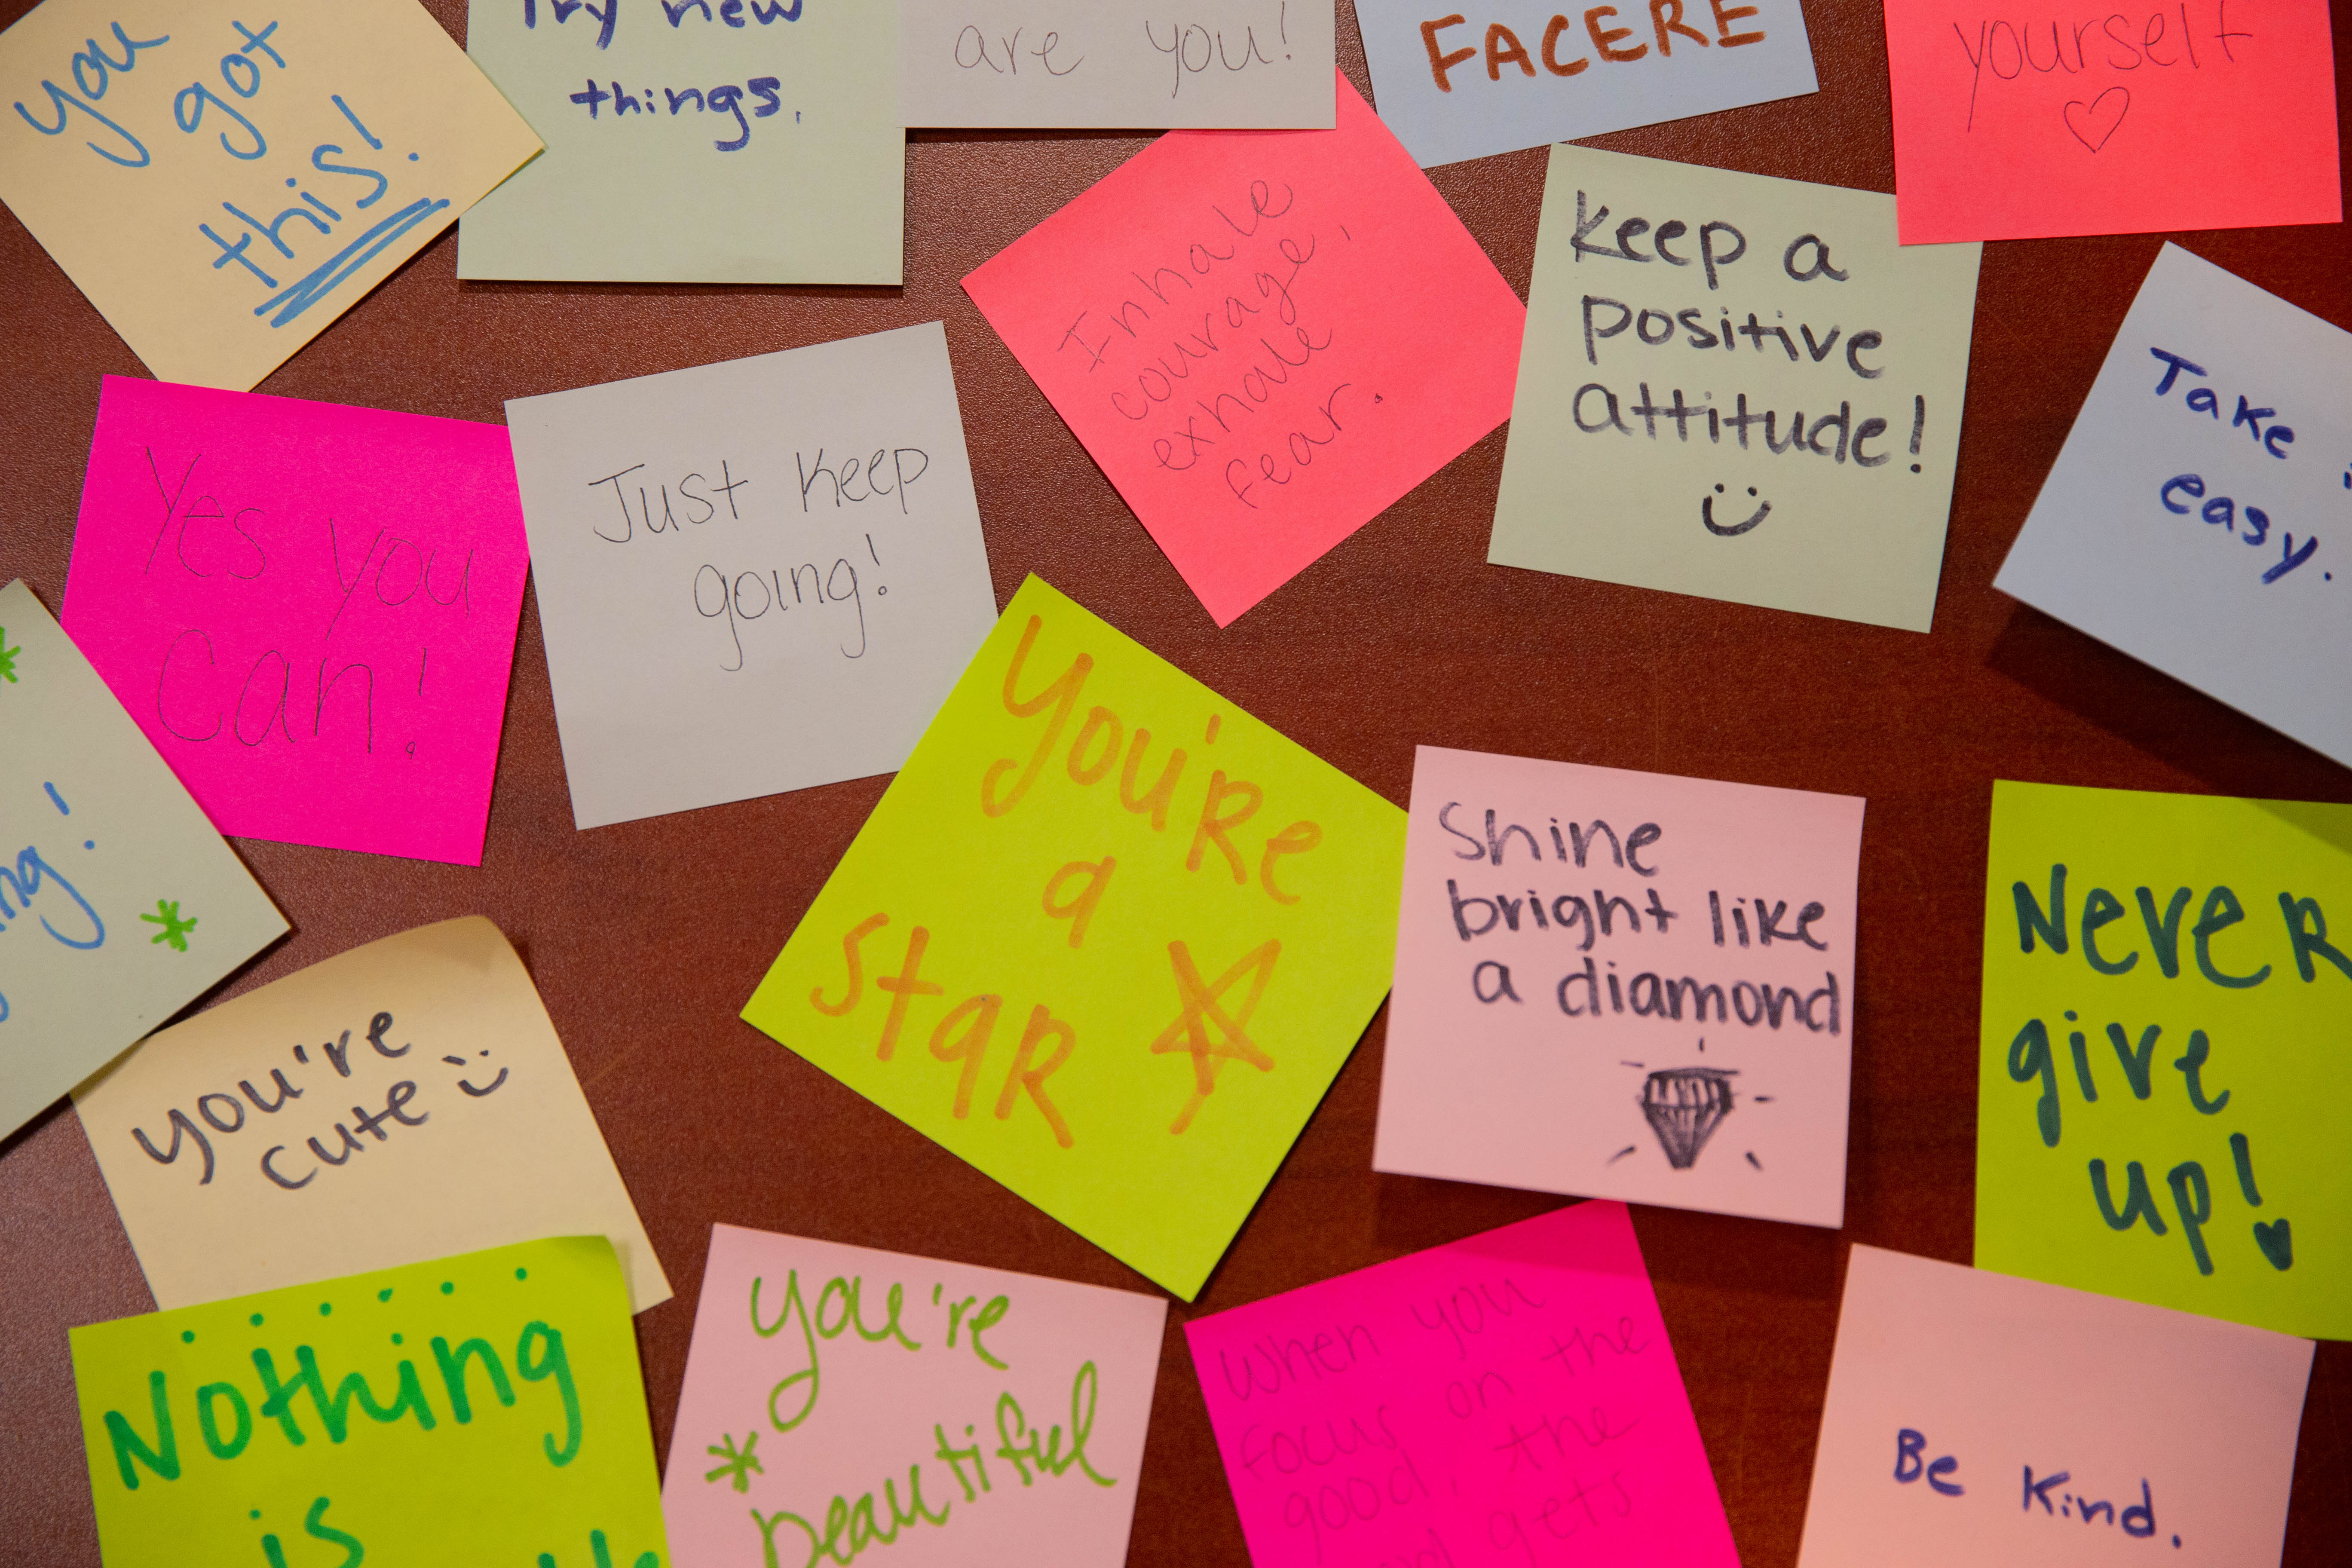 OPINION: Compliments displayed on sticky notes fail to help those with low self-esteem